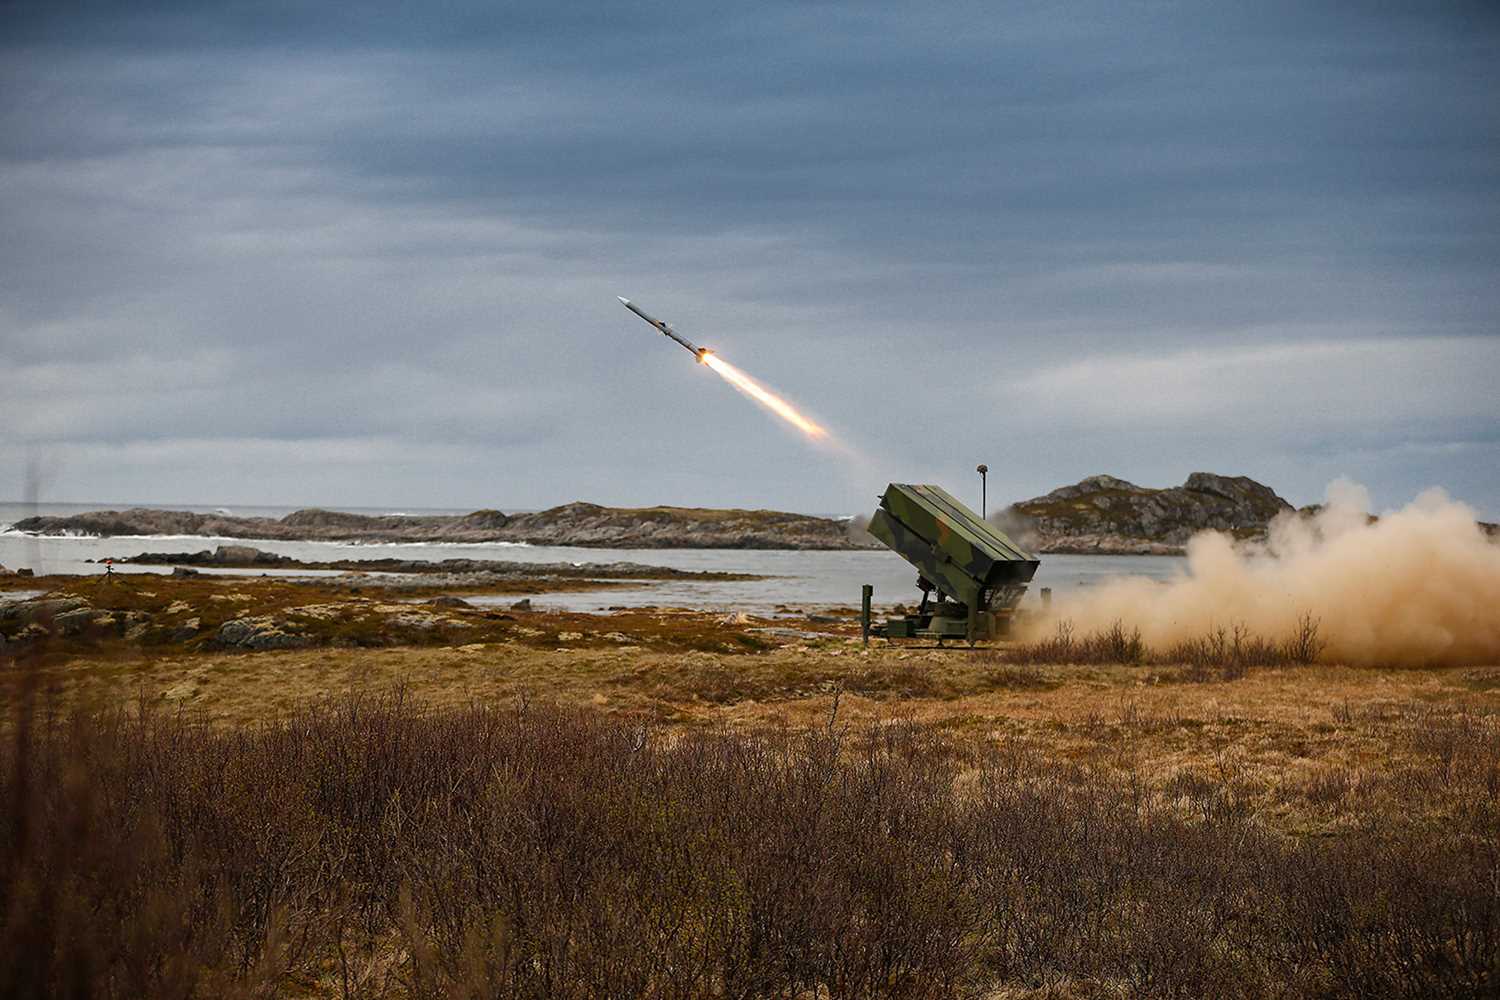 The USA will transfer 8 NASAMS air defense systems to Ukraine